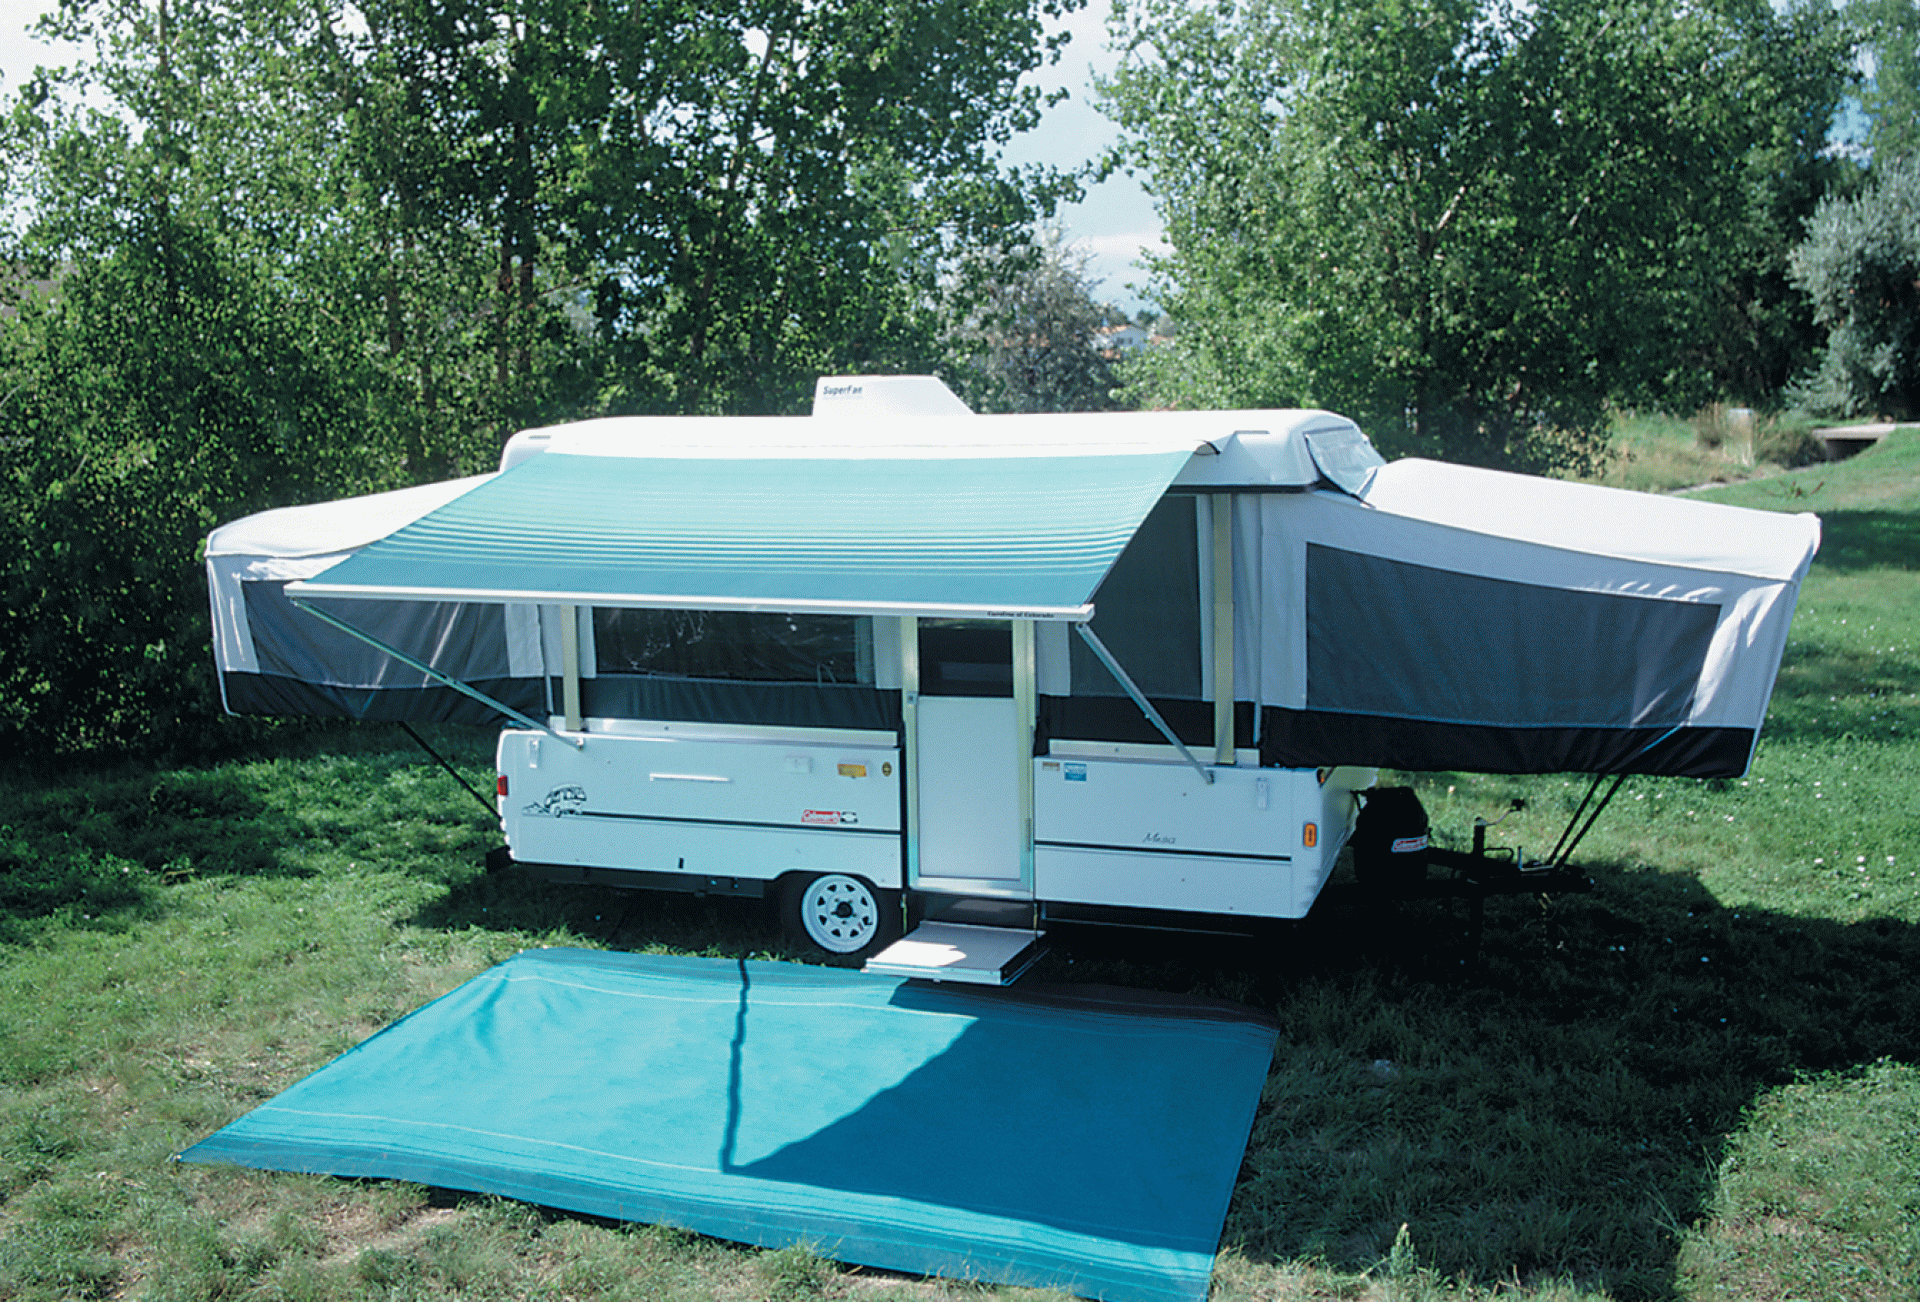 CAREFREE OF COLORADO | 981018B00 | Campout Awning 2.5 Metric 8' 5" Bordeaux Dune Stripe with White Bag